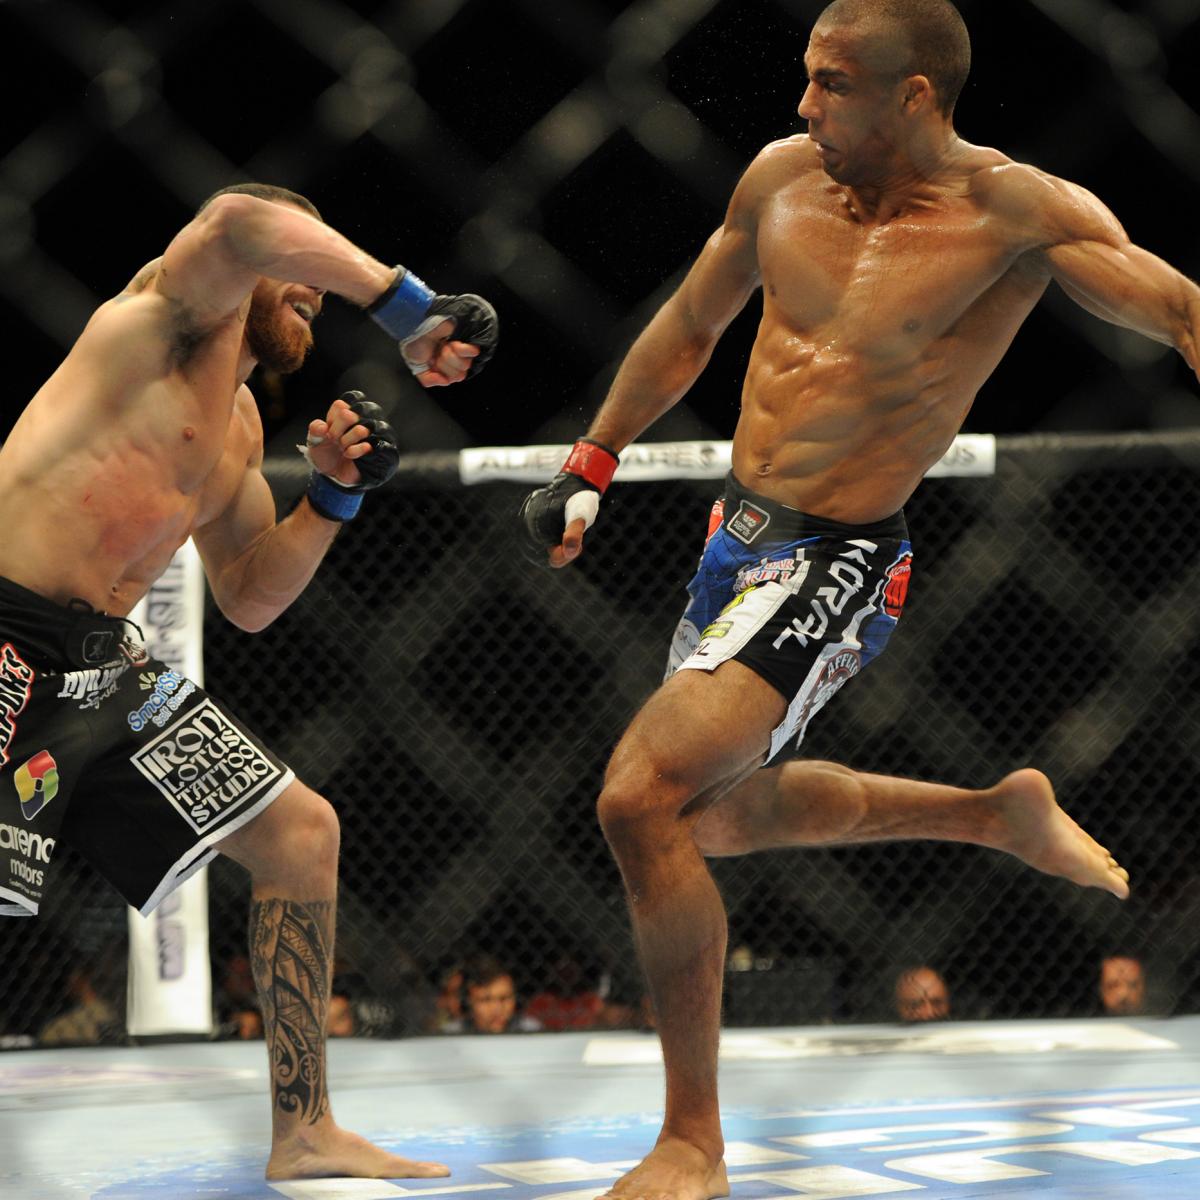 Edson Barboza Looking for Top-5 Opponent in Next UFC Fight | News ...